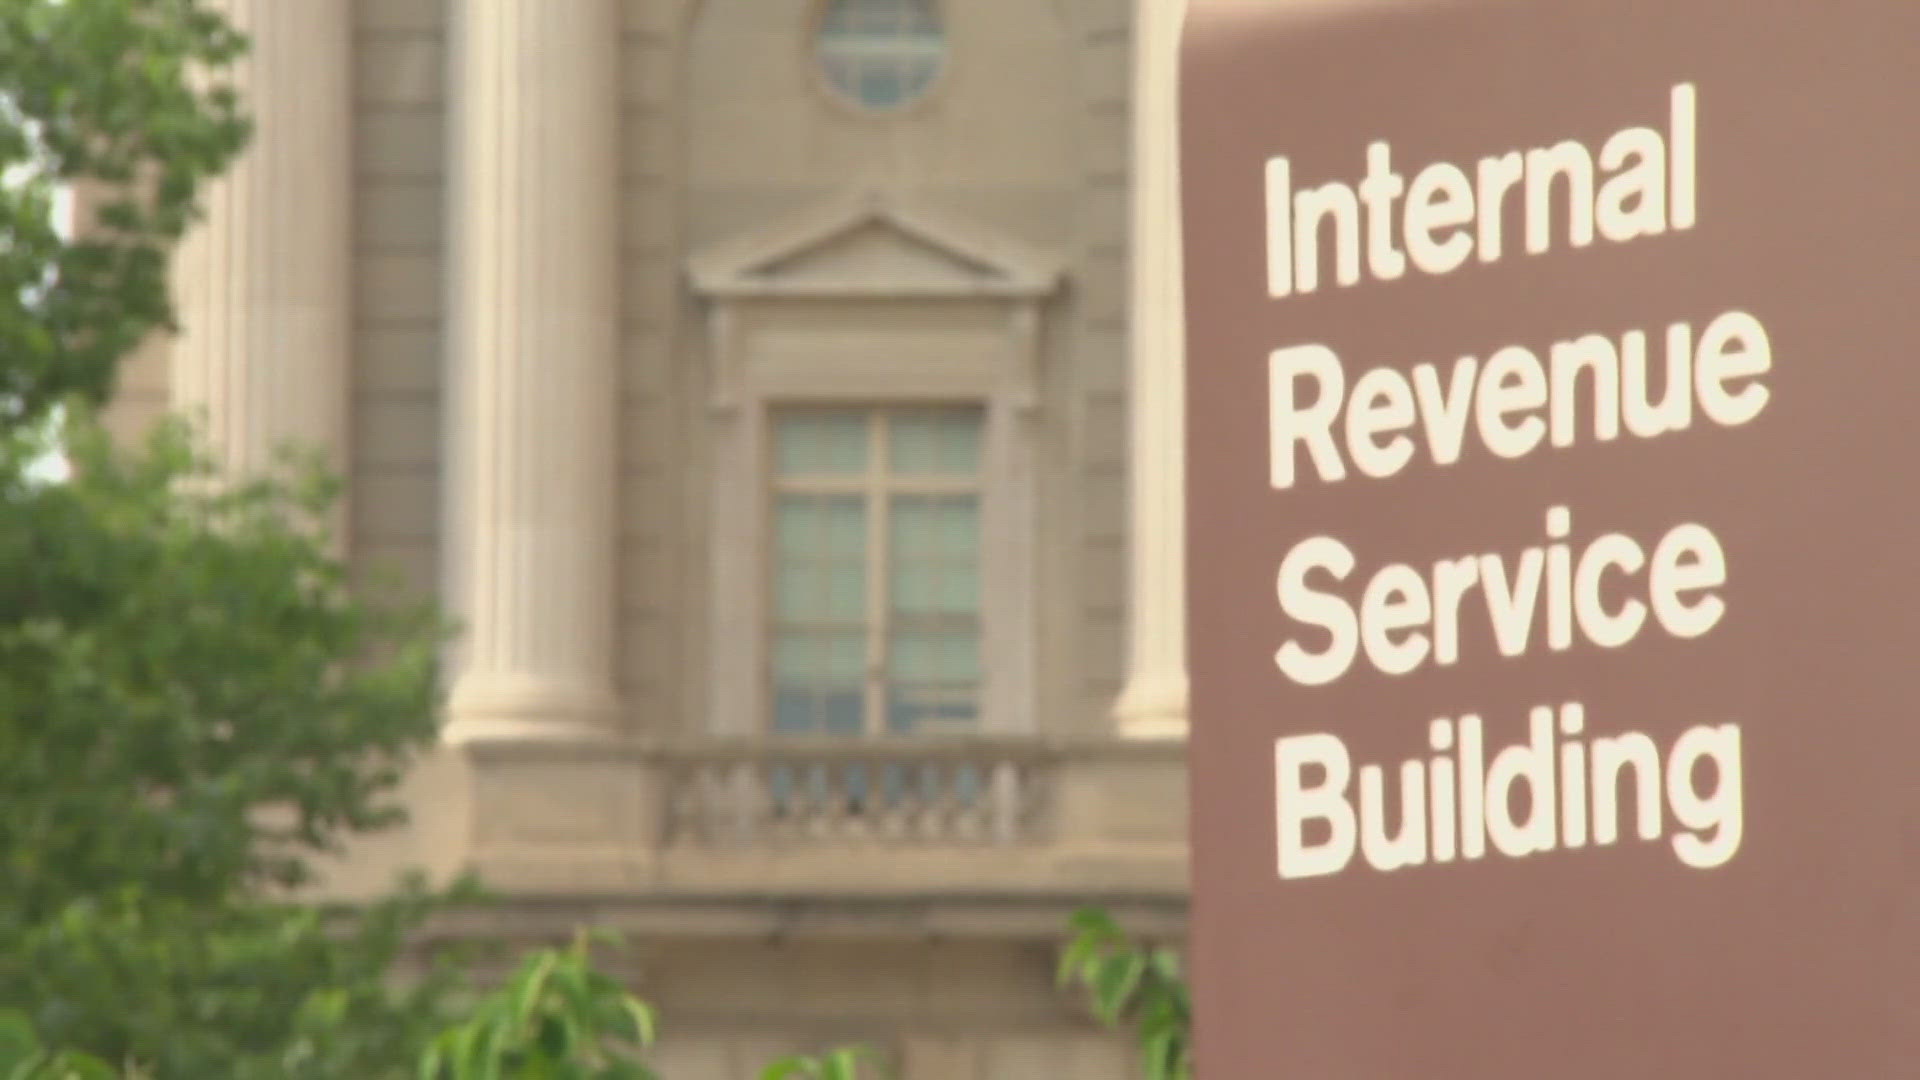 The IRS is hiring criminal investigators. The IRS is seeking divorce voices that reflect the areas they work in.